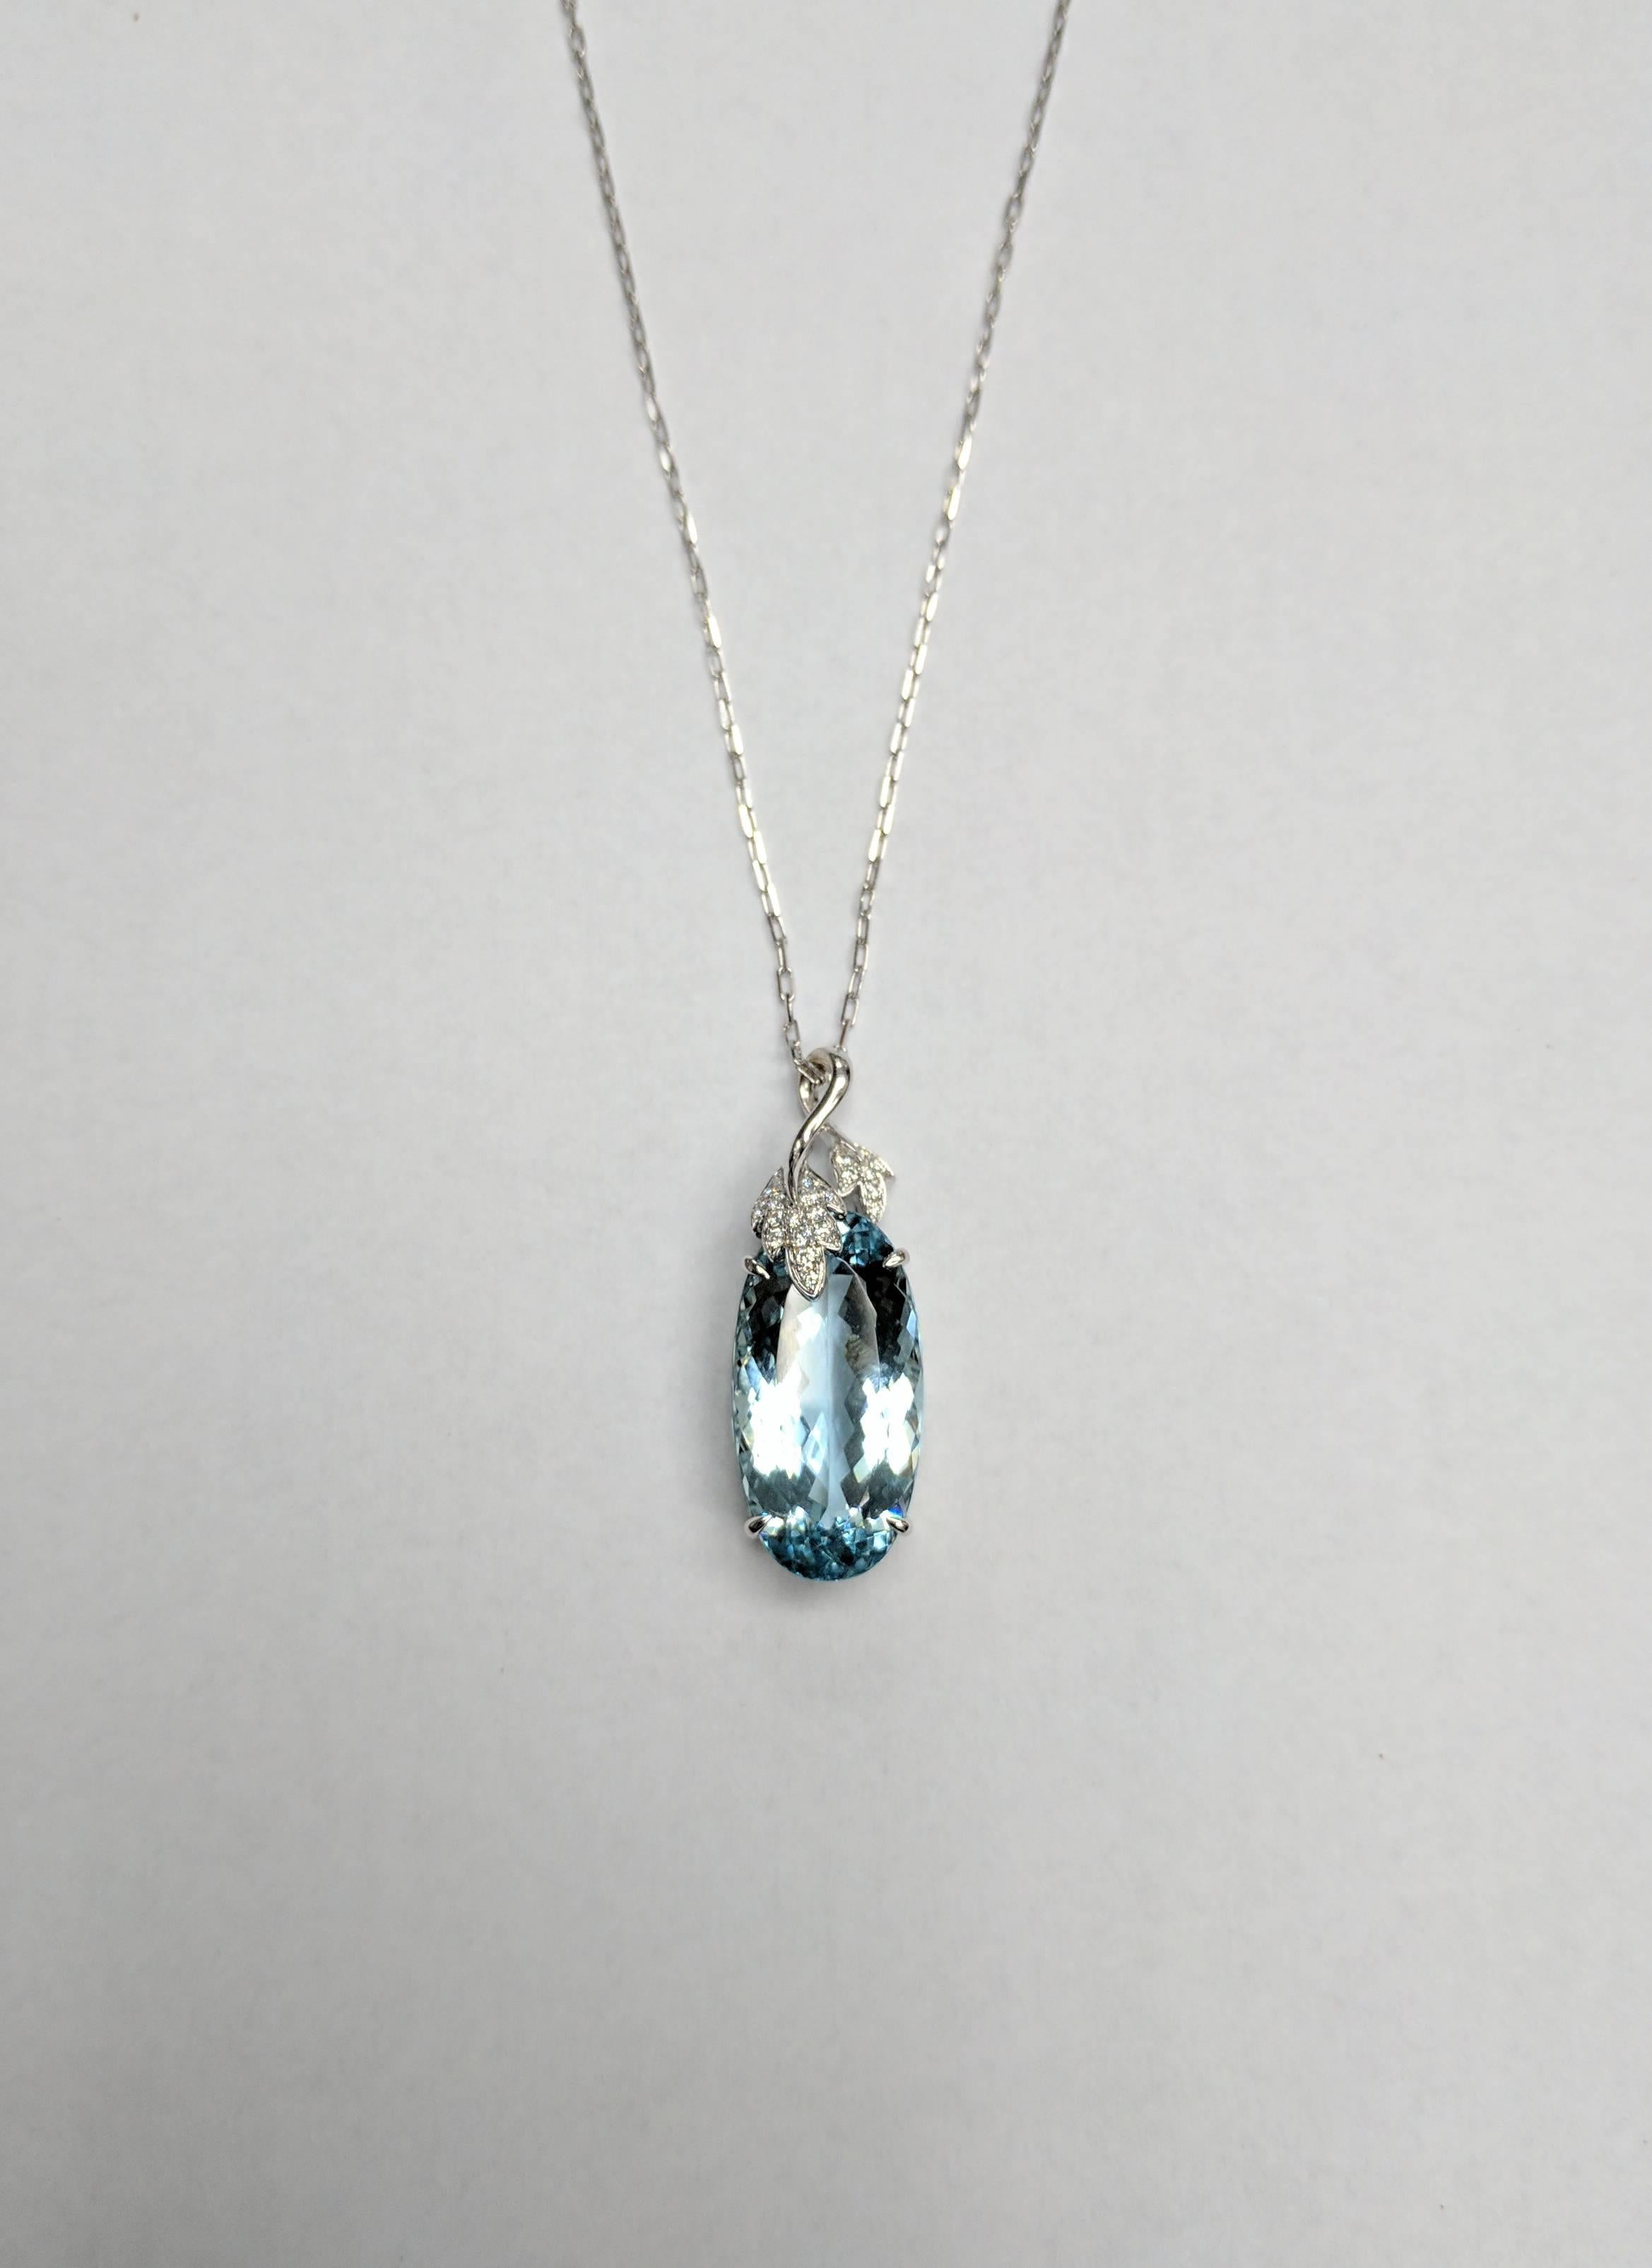 One-of-a-kind Frederic Sage oval Aquamarine pendant with diamond leaf bale and chain (included) set in 18 karat white gold

Total Aquamarine weight: 17.77 ct
Total diamond count: 21 
Total diamond weight: 0.21 ct